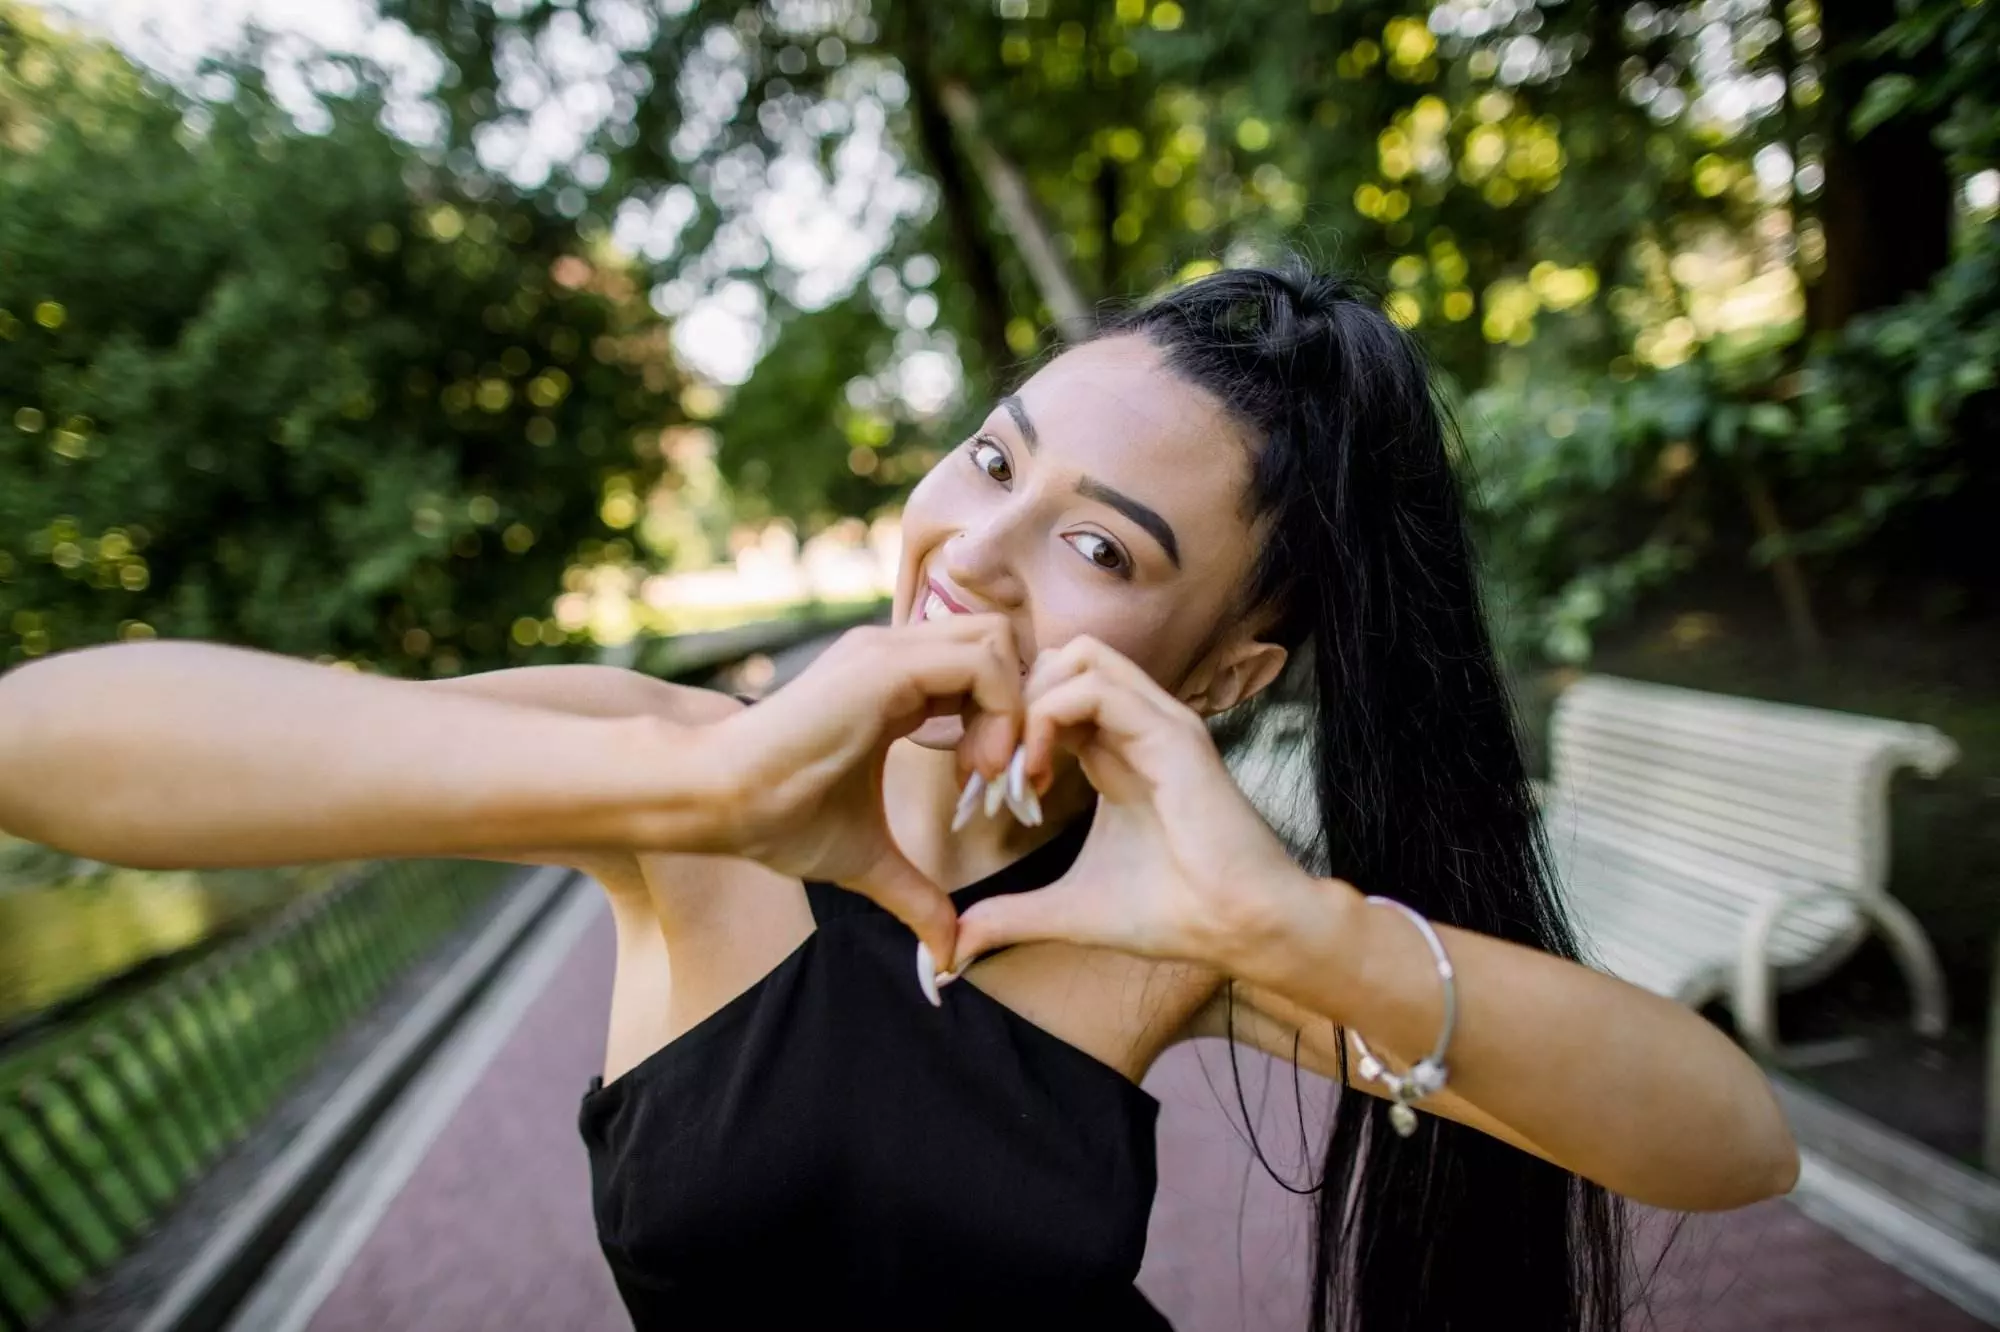 Asian woman making heart shape with hands